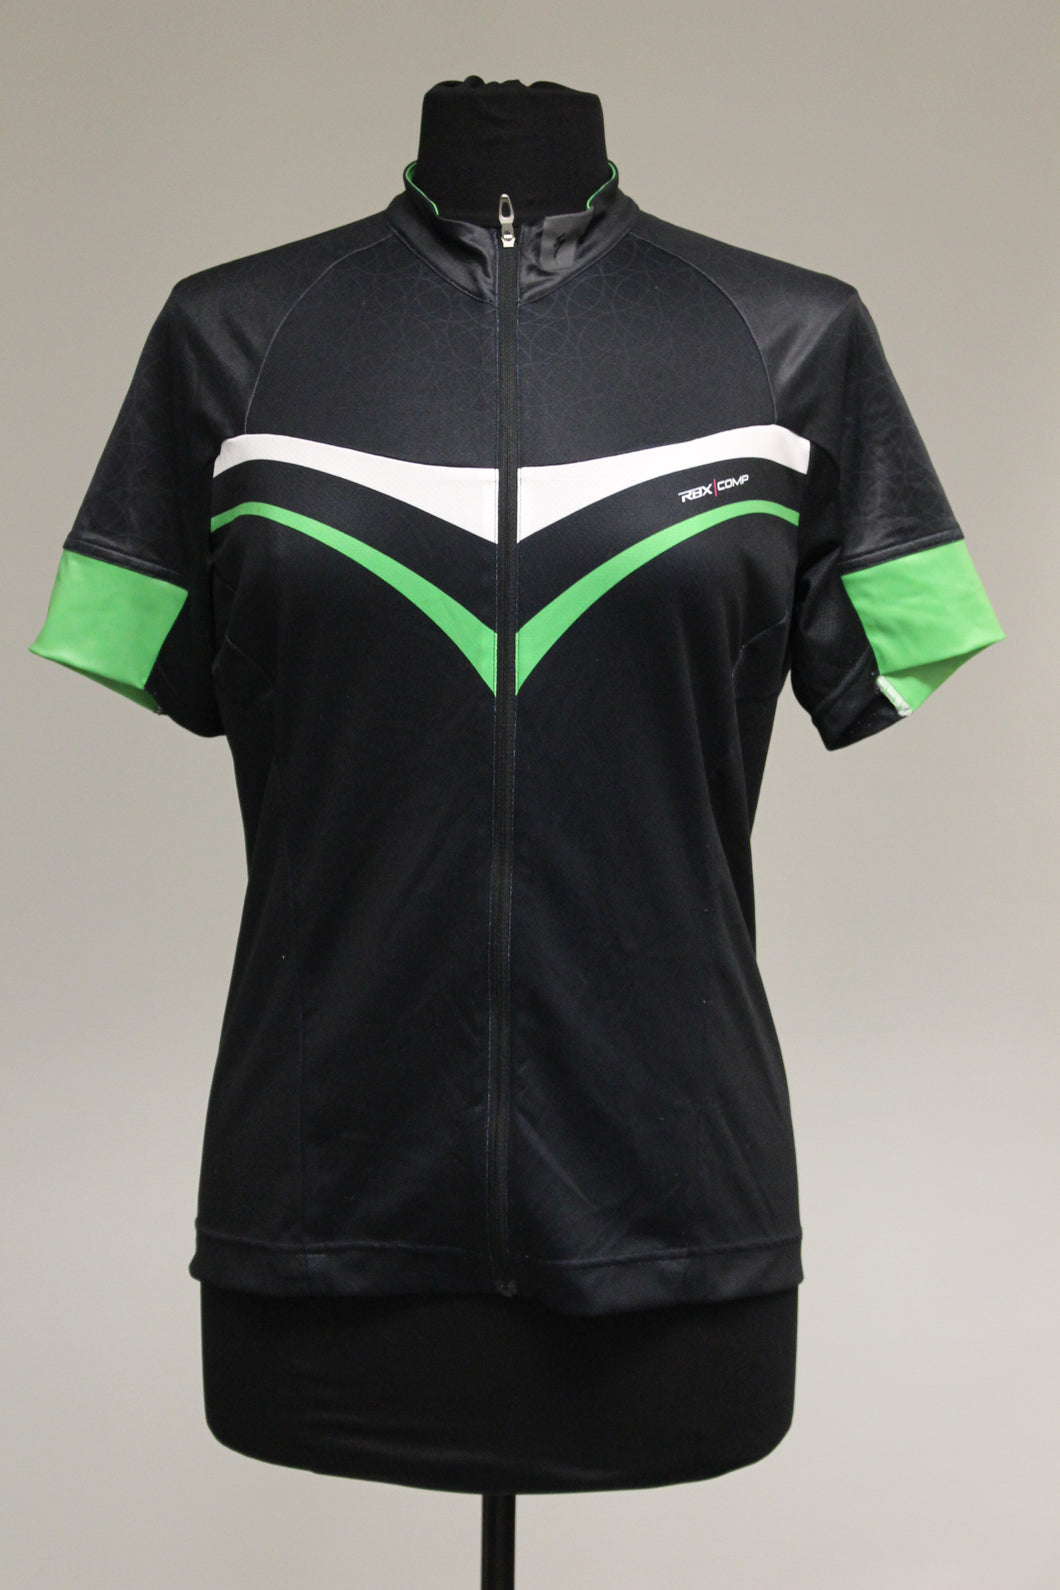 RBX Performance Cycling Jersey/Top, Size: Large